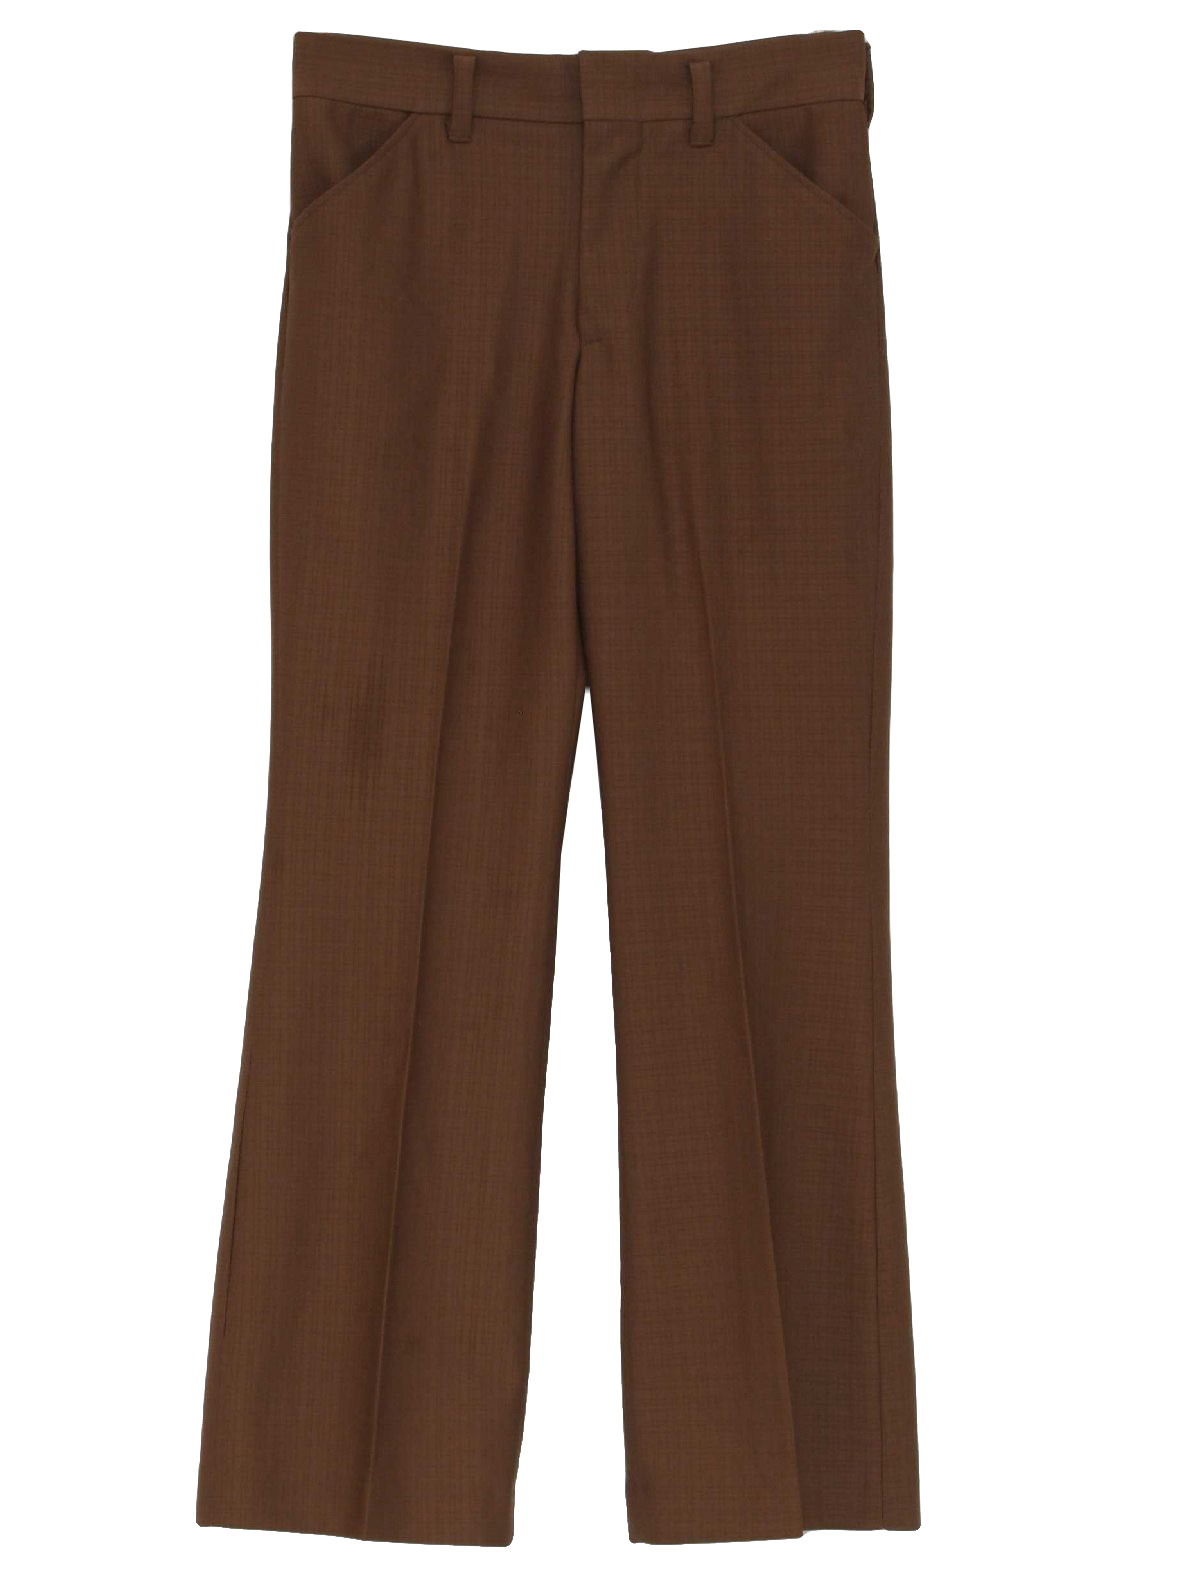 Retro 70's Pants: 70s -Care Label Only- Mens Cocoa brown solid colored ...